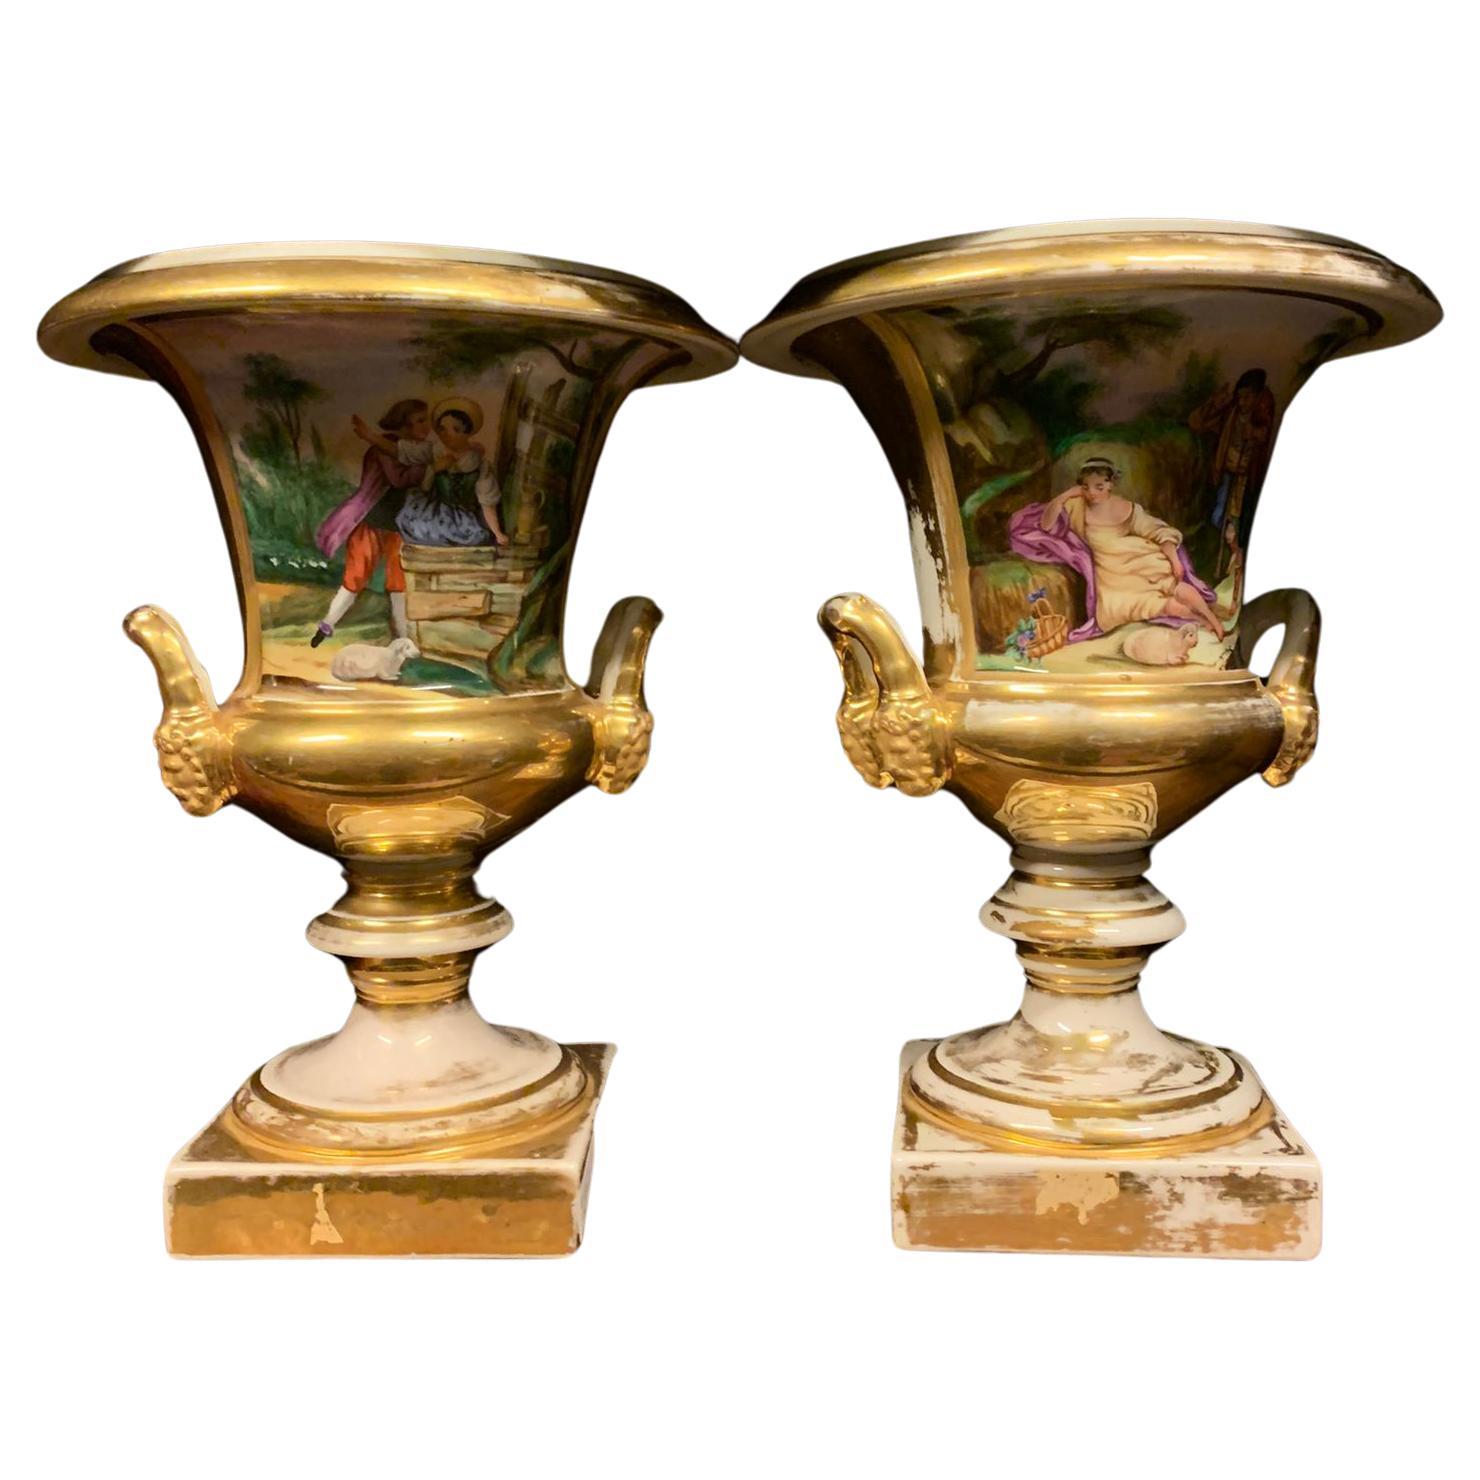 Pair of porcelain vases, polychrome with bucolic scenes and gilded edges, Italy